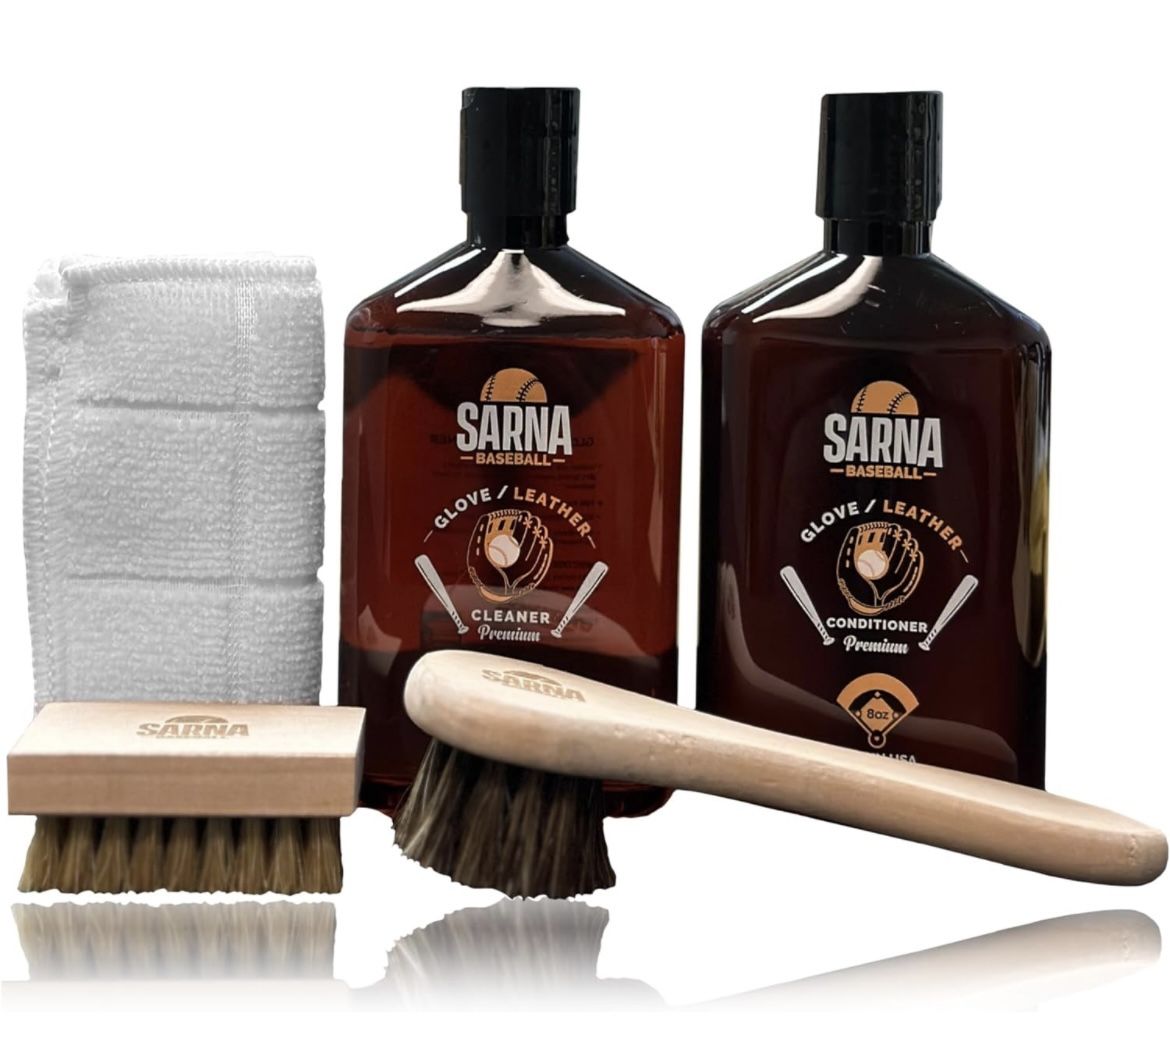 Baseball Glove Maintenance Kit Premium Leather Conditioner and Leather Cleaner (8 oz.) - Includes Cleaning and Brushes and Microfiber Towel